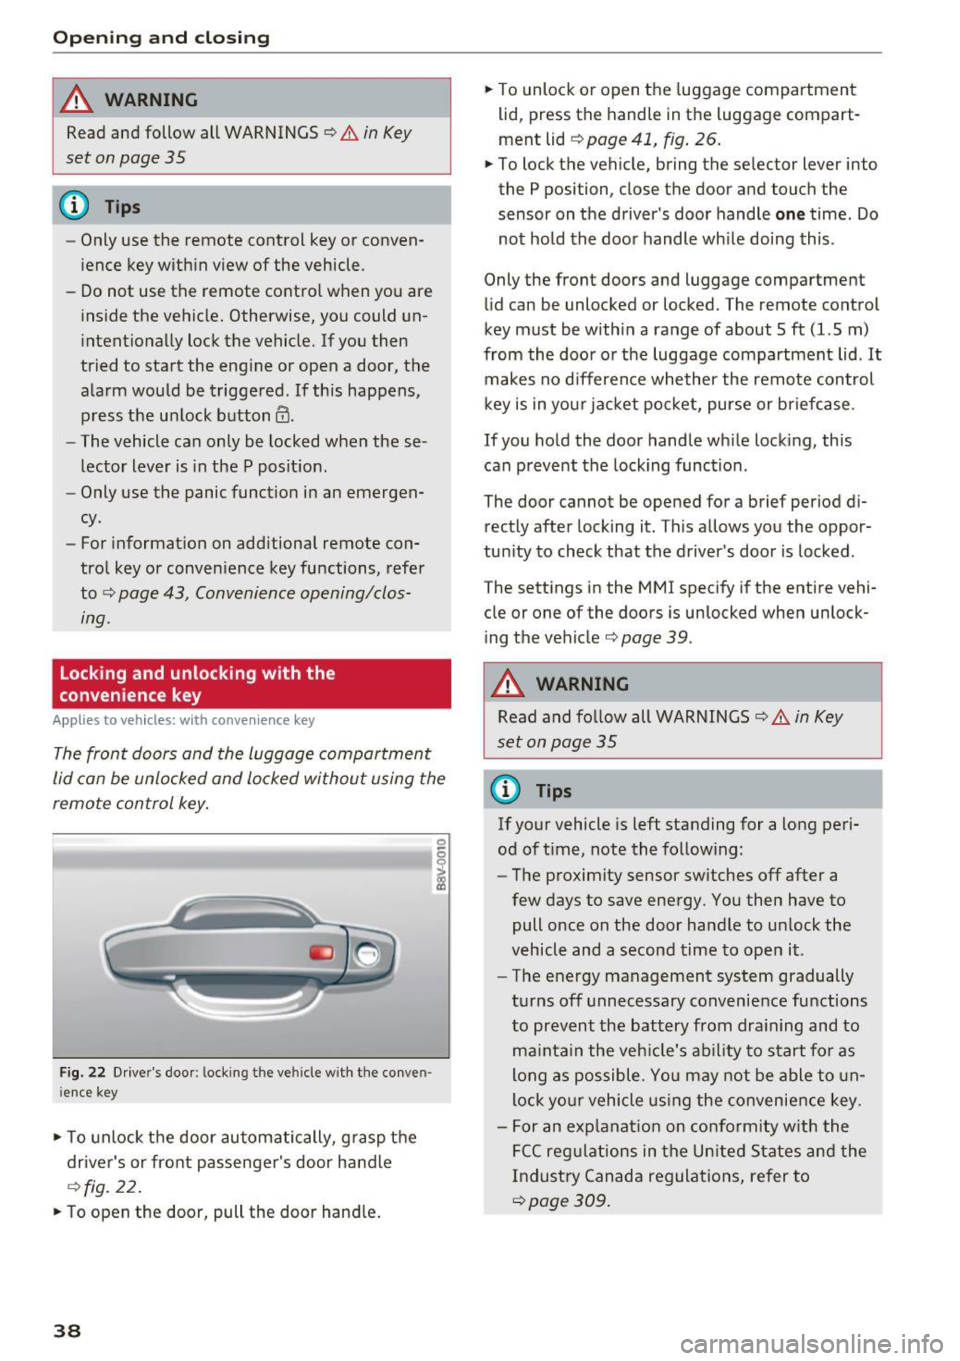 AUDI S3 2016  Owners Manual Opening  and clo sin g 
A WARNING 
Read and follow all  WARNINGS¢.& in Key 
set  on page 
3 5 
@ Tips 
- Only use the  remote  control  key or conven­
ience key within view of the  vehicle. 
- Do no